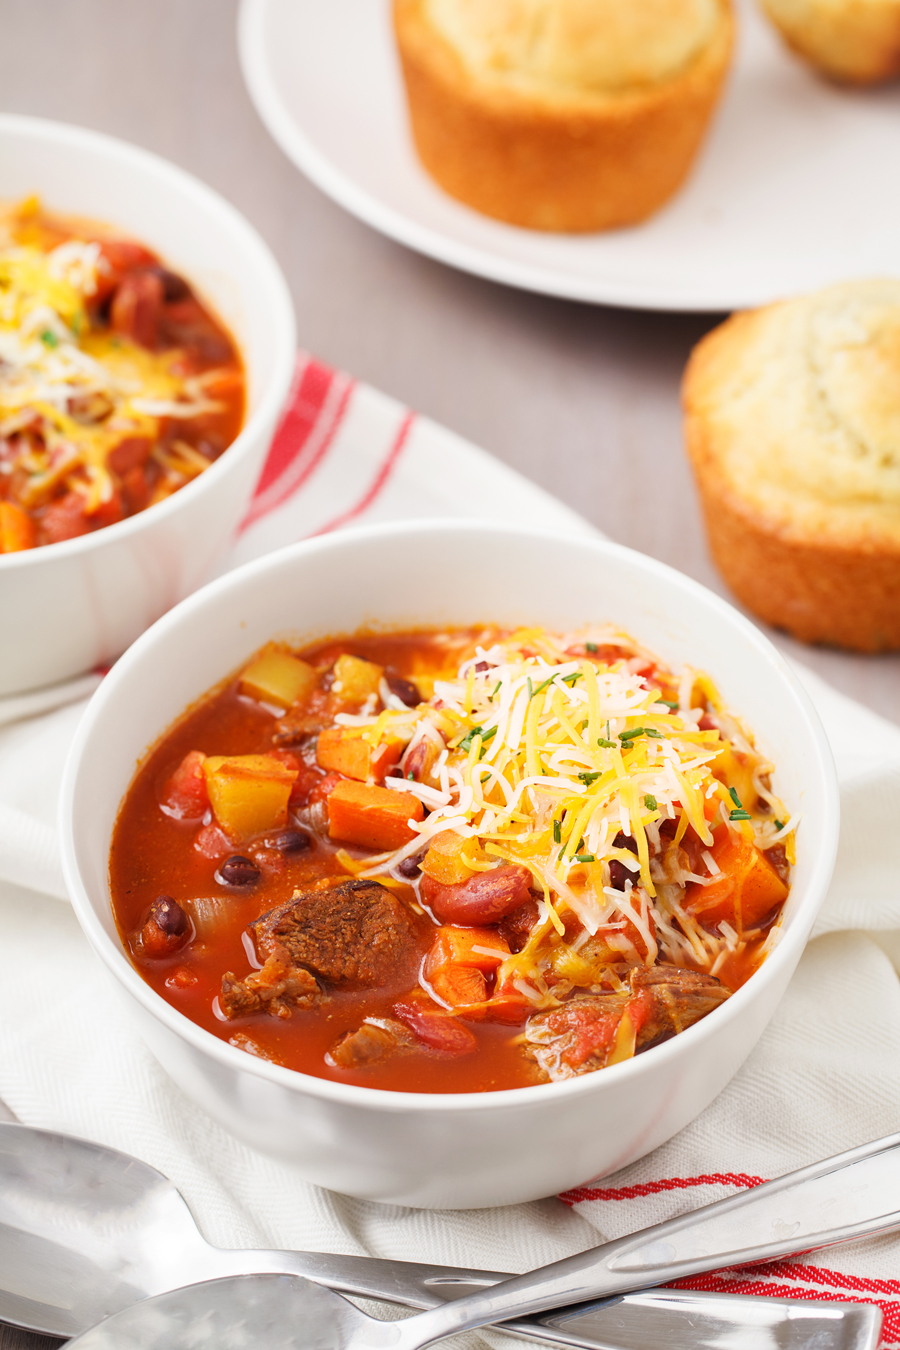 This Slow Cooker Venison Chili is the perfect weeknight meal. Pair this chili with a fresh garden salad and homemade bread for a hearty meal. 